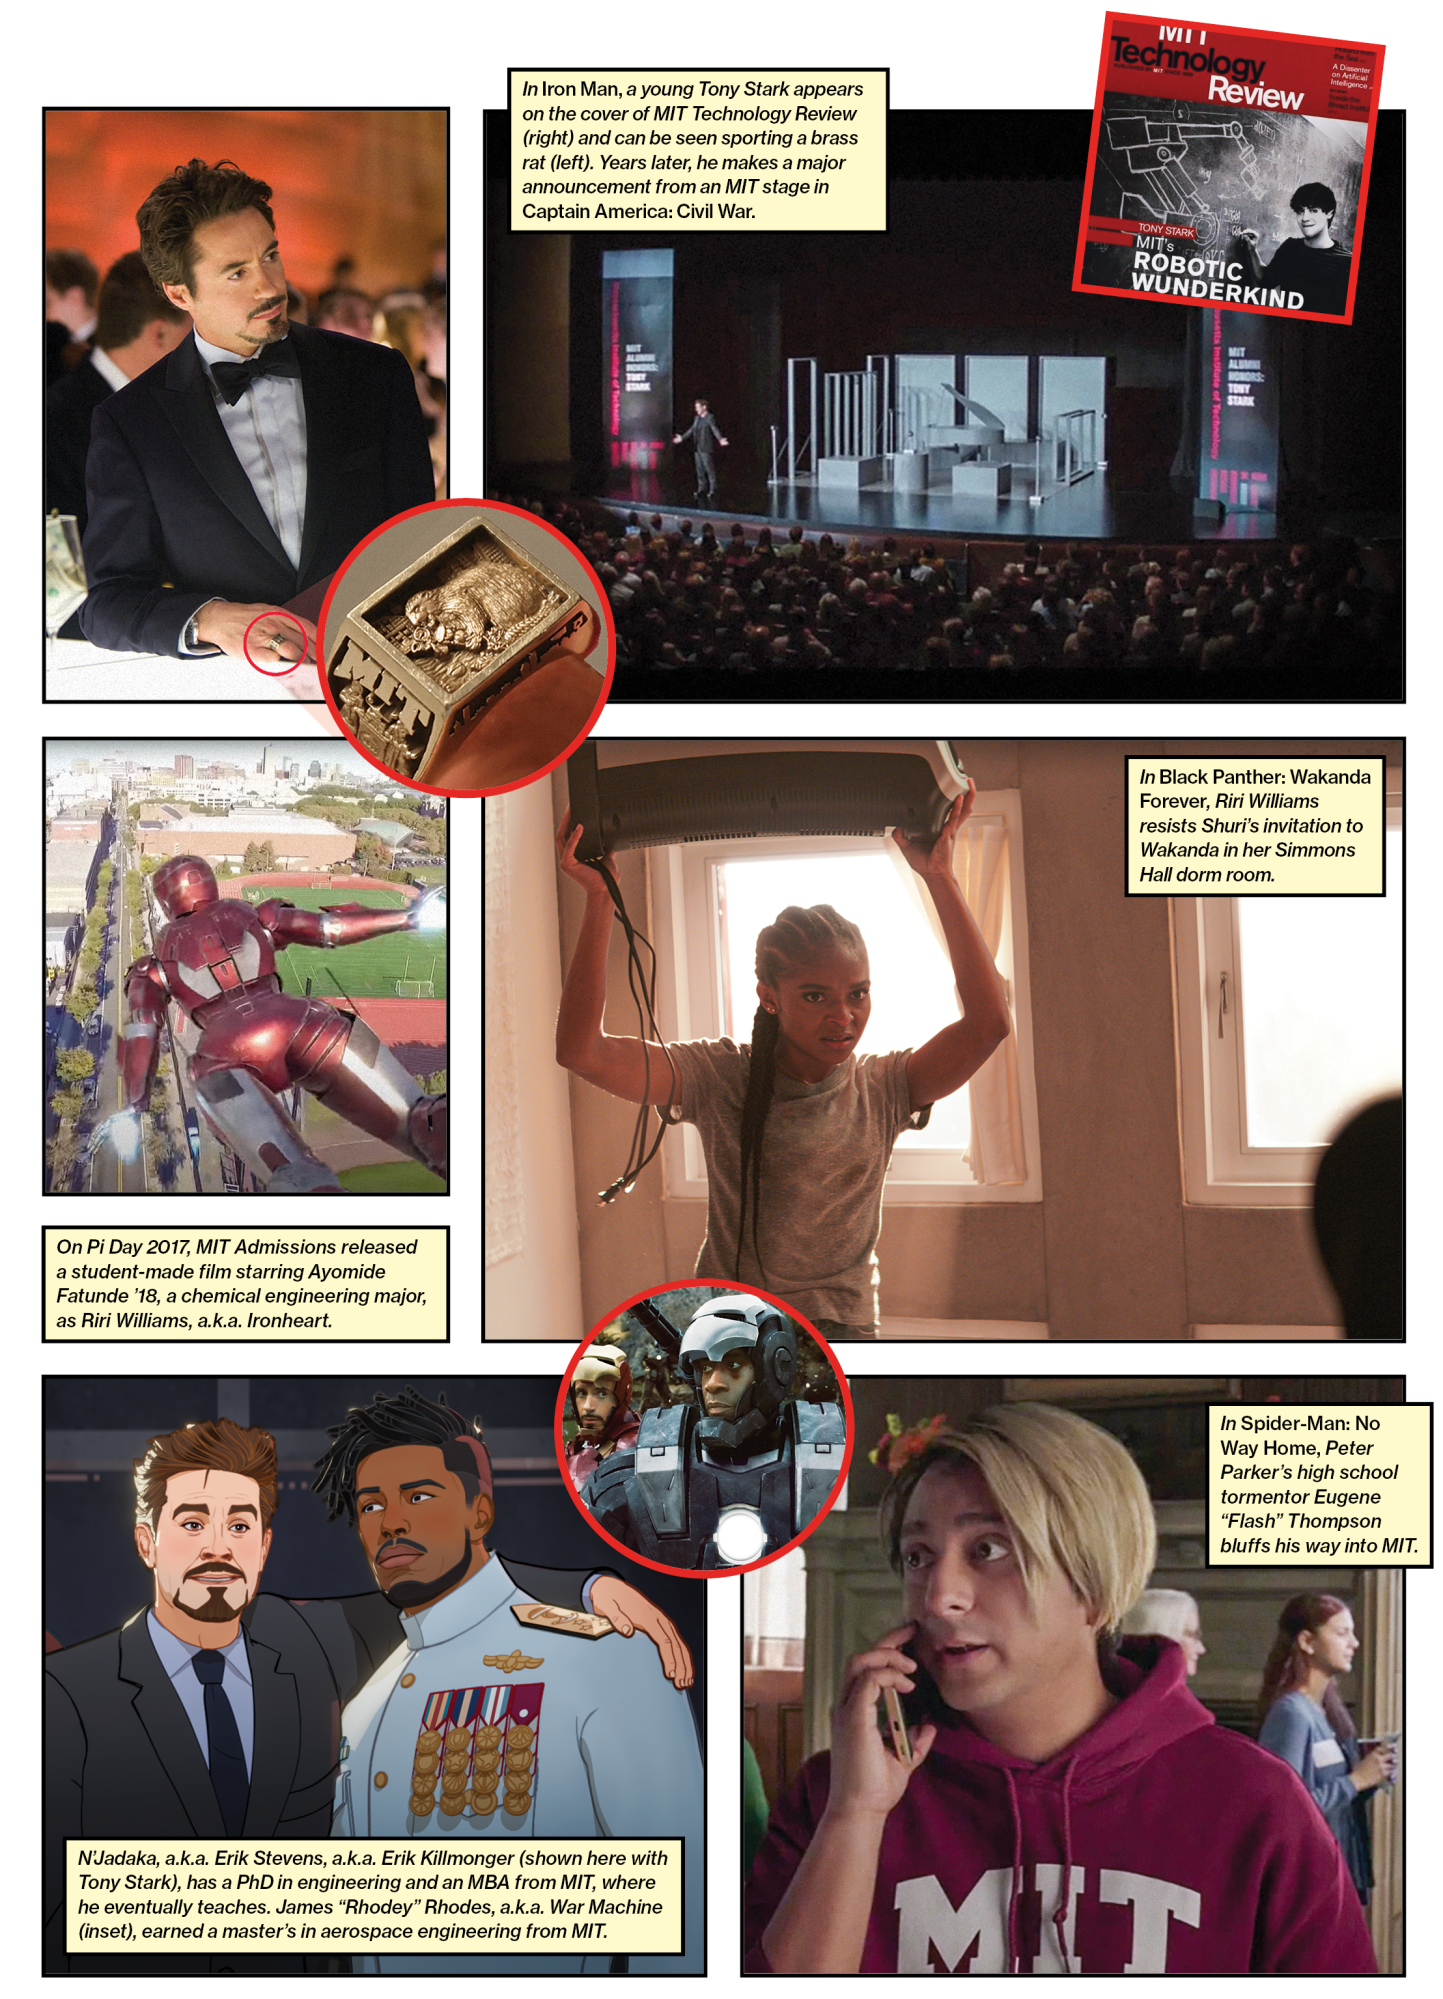 Composite Image of movie stills in comic format. First panel: In Iron Man, a young Tony Stark appears on the cover of MIT Technology Review (right) and can be seen sporting a brass rat (left). Years later, he makes a major announcement from an MIT stage in Captain America: Civil War. Second panel: On Pi Day 2017, MIT Admissions released a student-made film starring Ayomide Fatunde ’18, a chemical engineering major, as Riri Williams, a.k.a. Ironheart. Third panel : In Black Panther: Wakanda Forever, Riri Williams resists Shuri’s invitation to Wakanda in her Simmons Hall dorm room. Fourth: In Spider-Man: No Way Home, Peter Parker’s high school tormentor Eugene “Flash” Thompson bluffs his way into MIT. Fifth panel: N’Jadaka, a.k.a. Erik Stevens, a.k.a. Erik Killmonger (shown here with Tony Stark), has a PhD in engineering and an MBA from MIT, where he eventually teaches. James “Rhodey” Rhodes, a.k.a. War Machine (inset), earned a master’s in aerospace engineering from MIT.